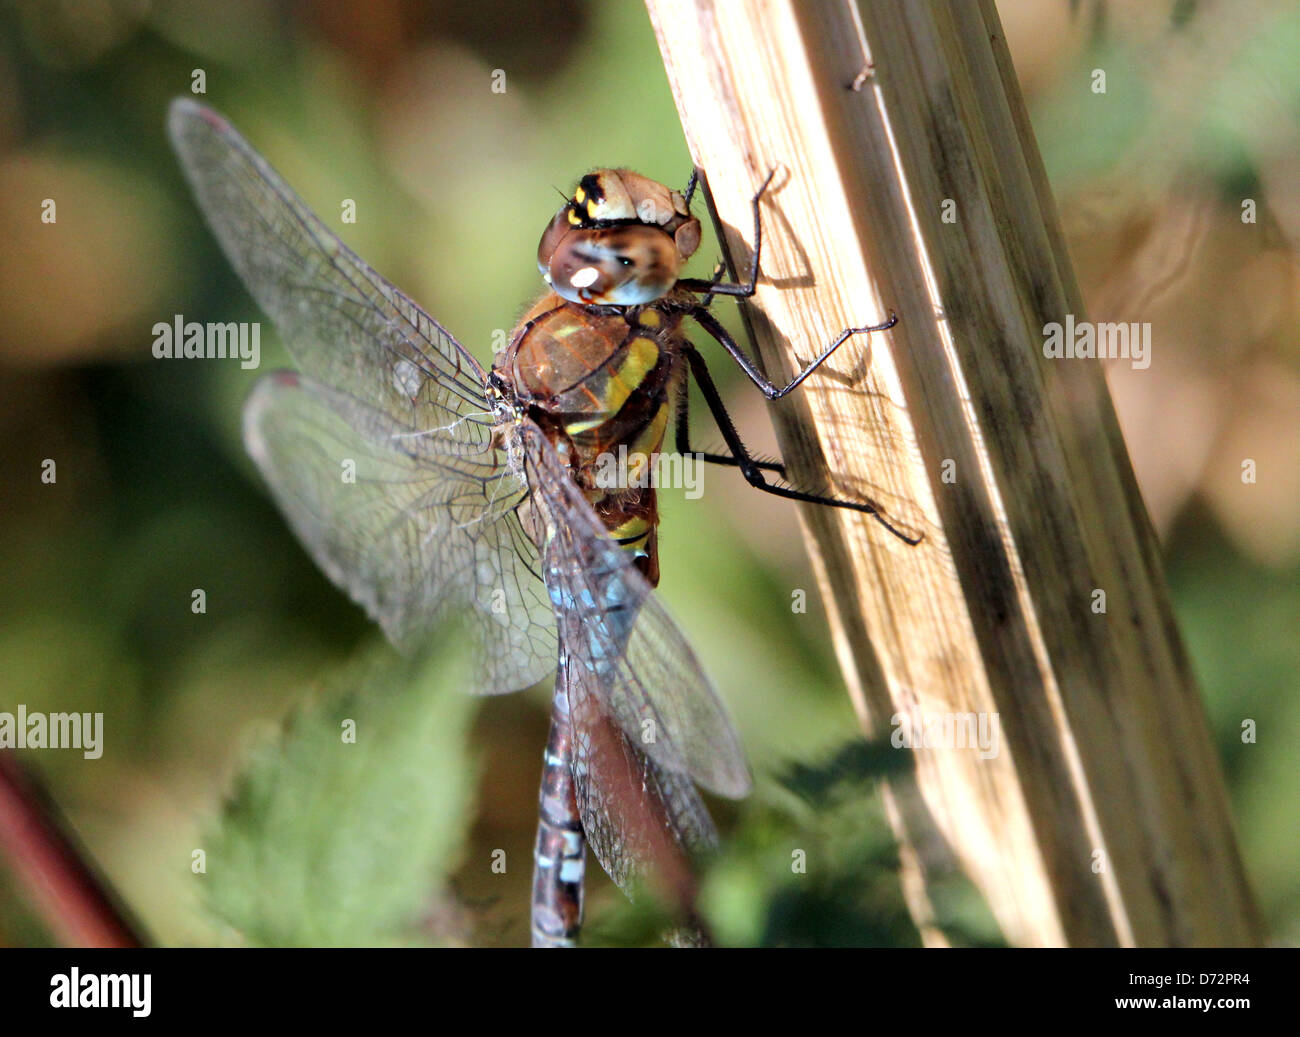 Detailed macro image of a Migrant Hawker-dragonfly (Aeshna mixta) resting and posing Stock Photo